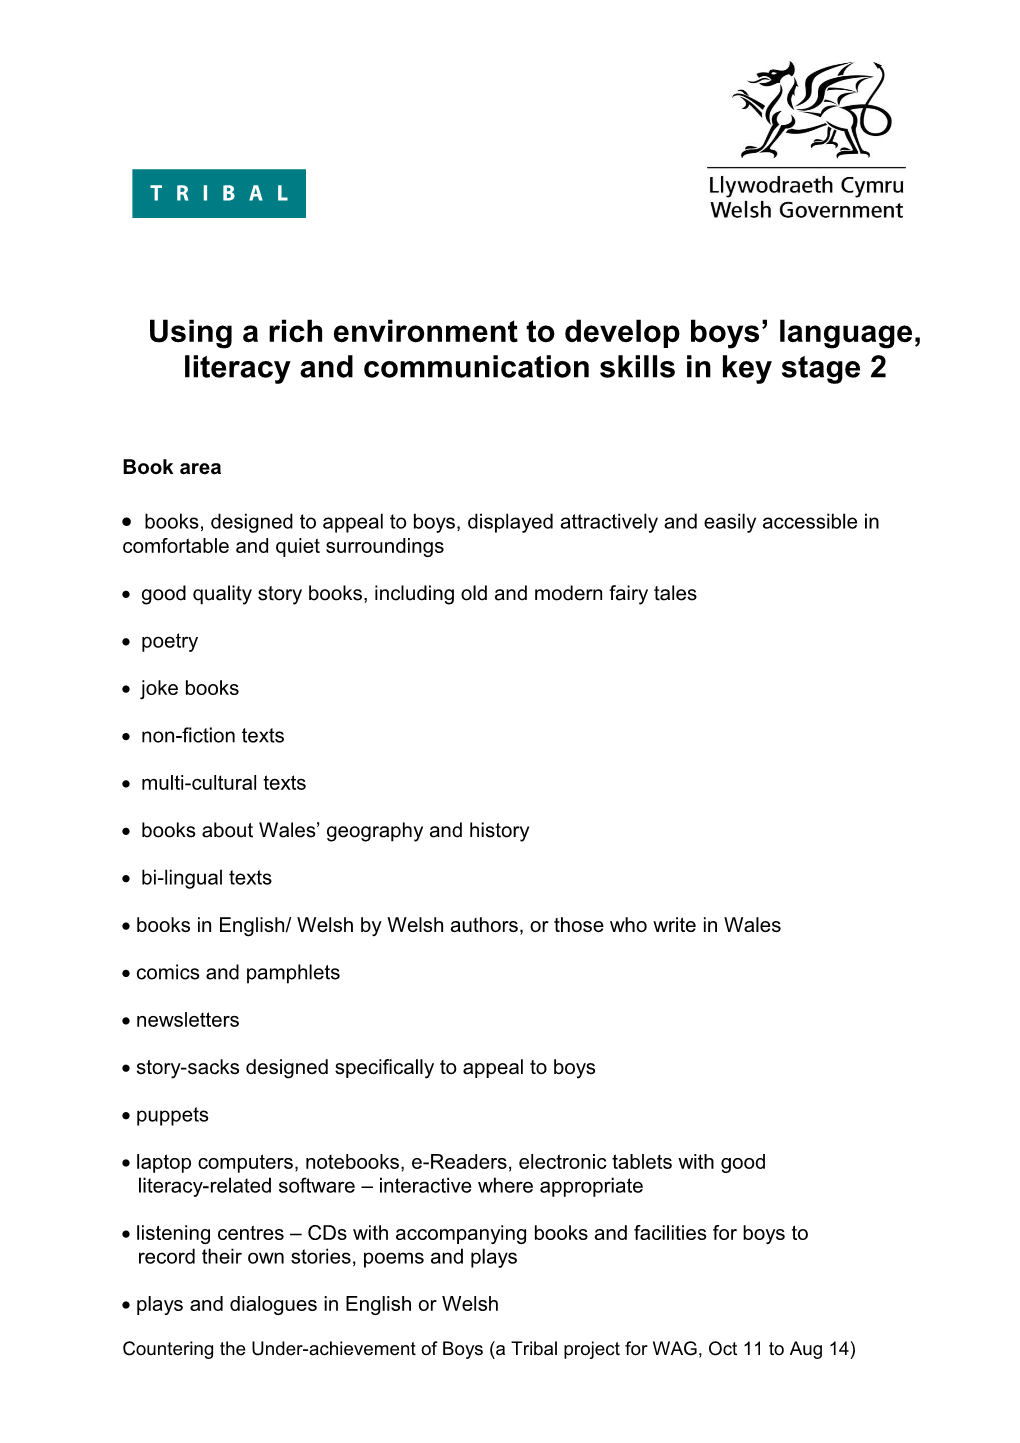 Strategic Leadership and Management of Literacy